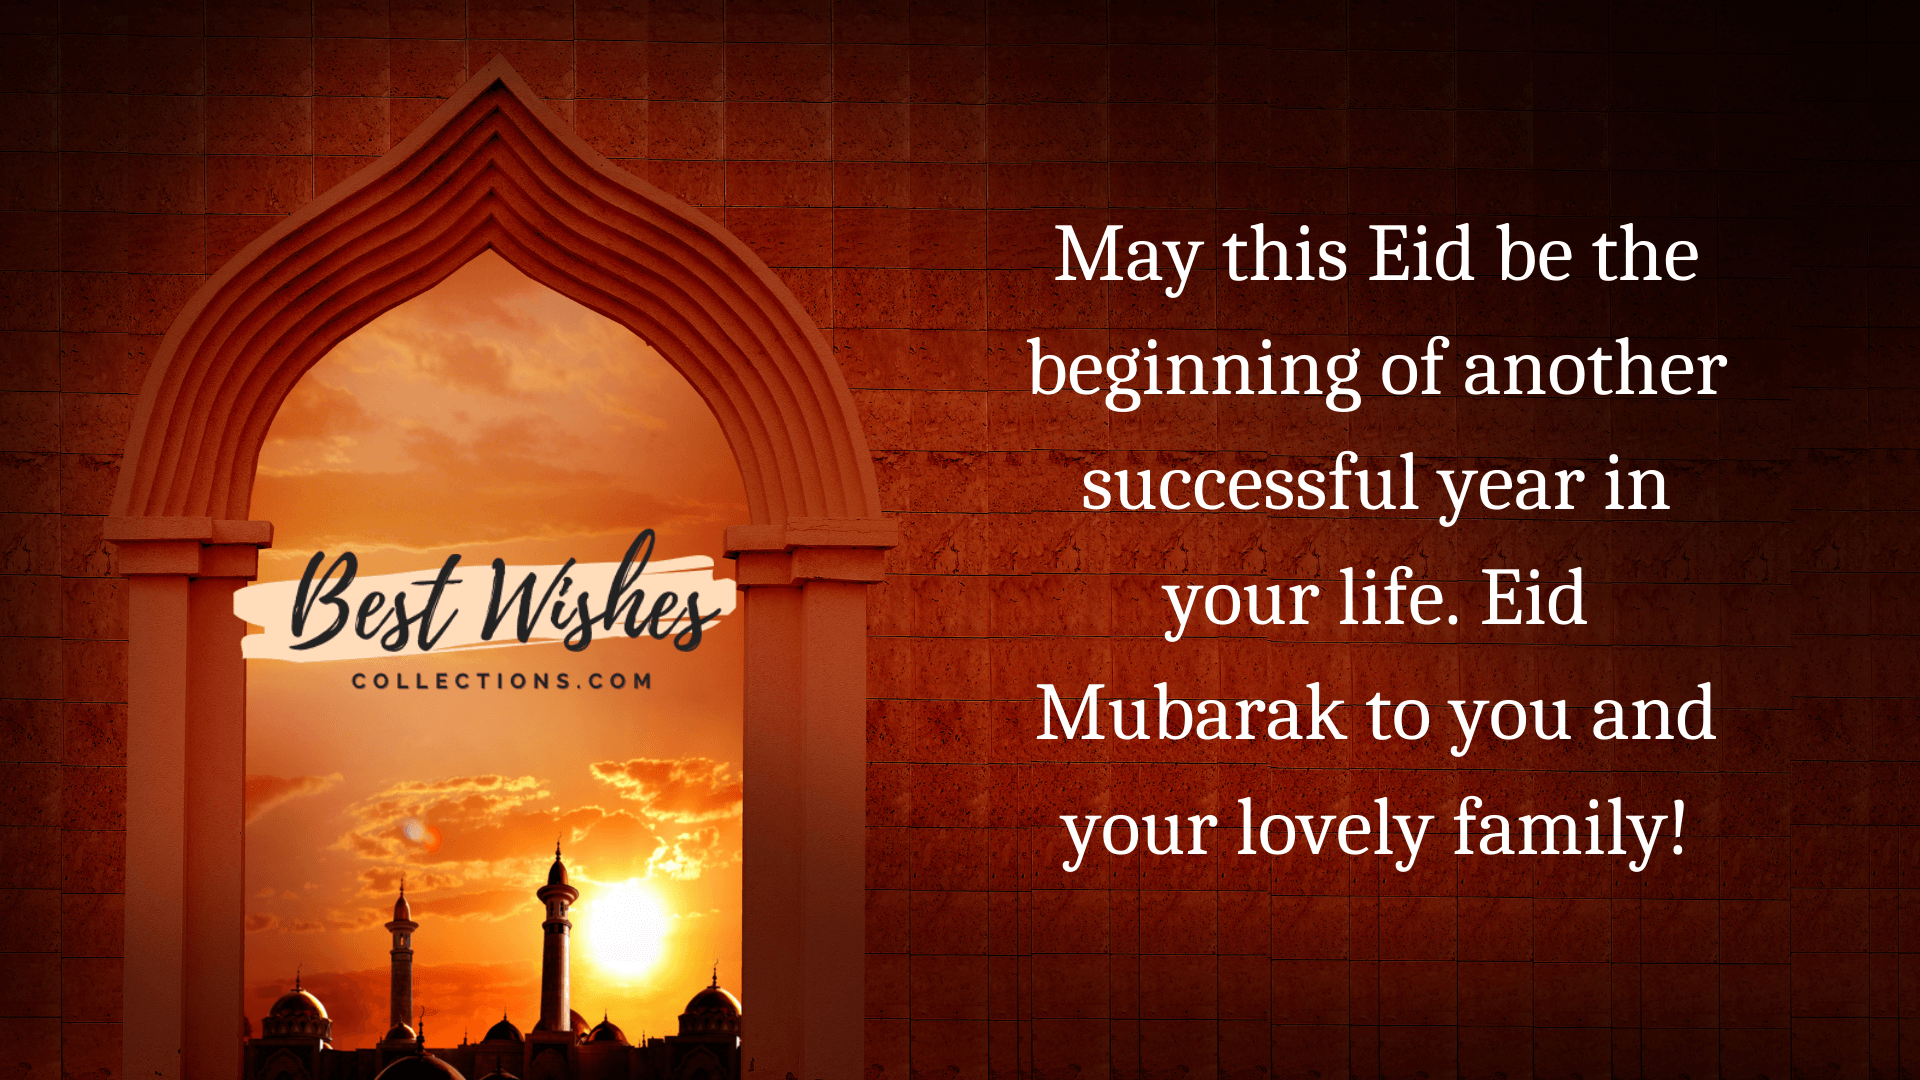 100+Happy EidulFitr Wishes, Messages, Quotes, Images, Chand Mubarak